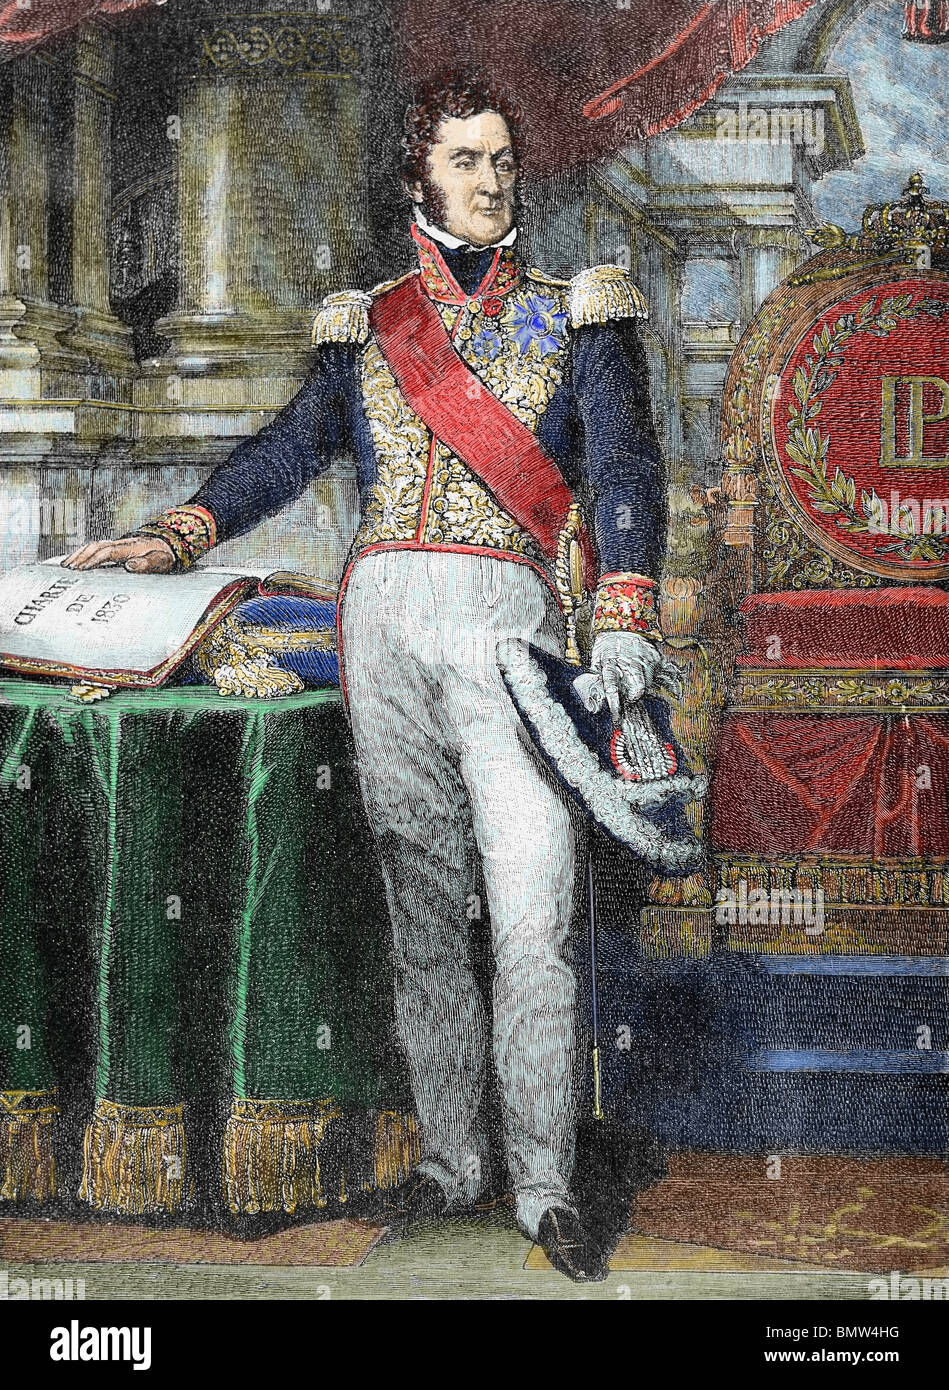 Louis-Philippe I (Paris ,1773-Claremont, 1850). King of France (1830-1848). Colored engraving. Stock Photo